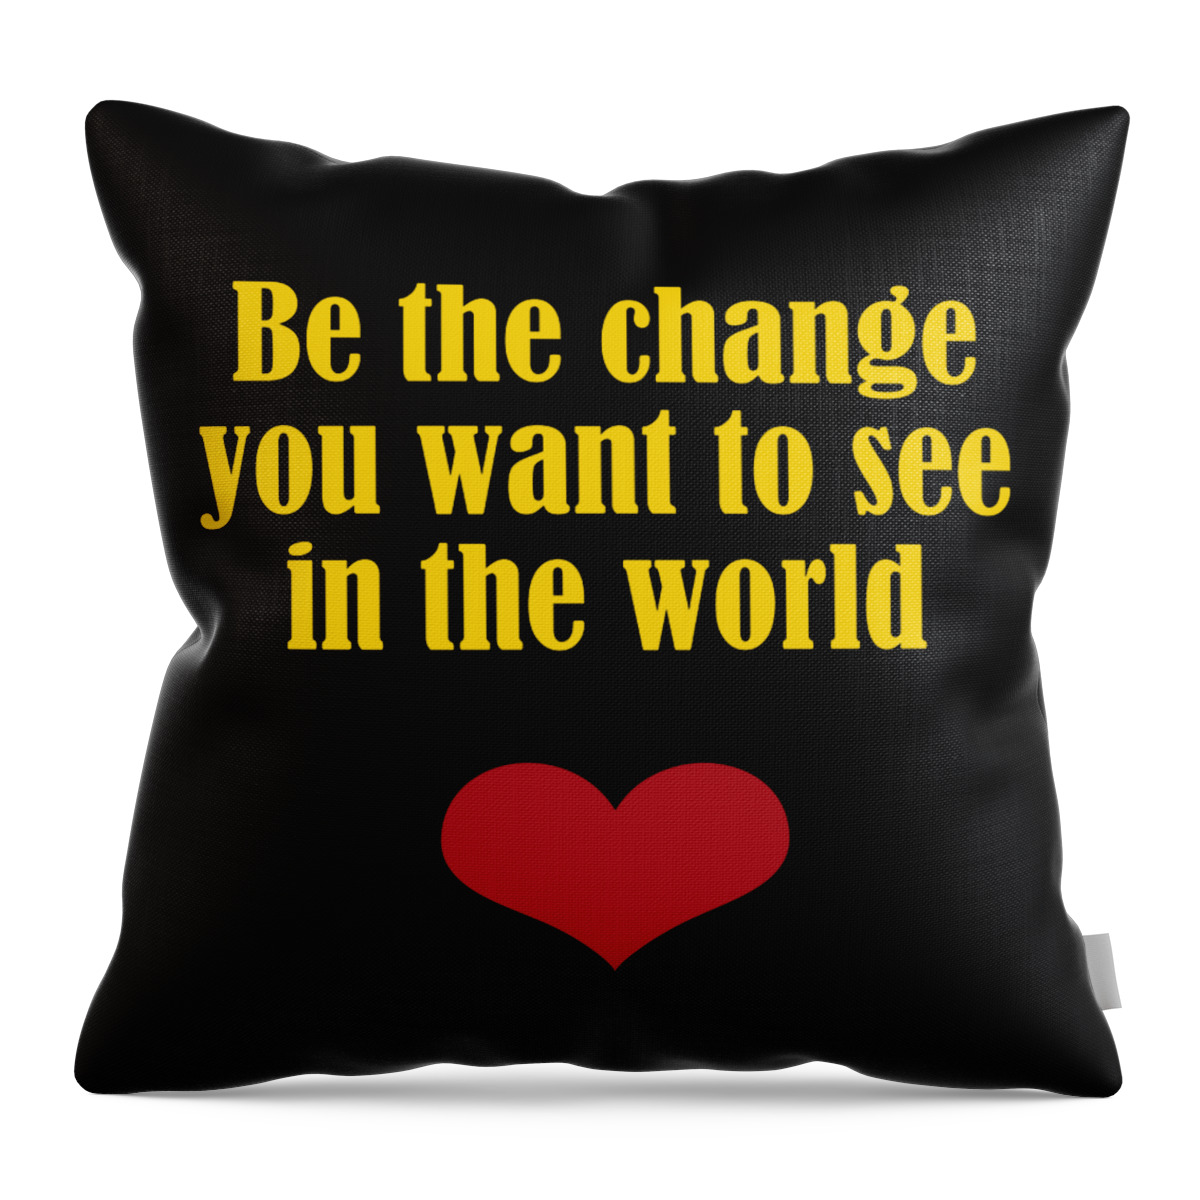 Change Throw Pillow featuring the digital art Be The Change You Want To See In The World by Johanna Hurmerinta